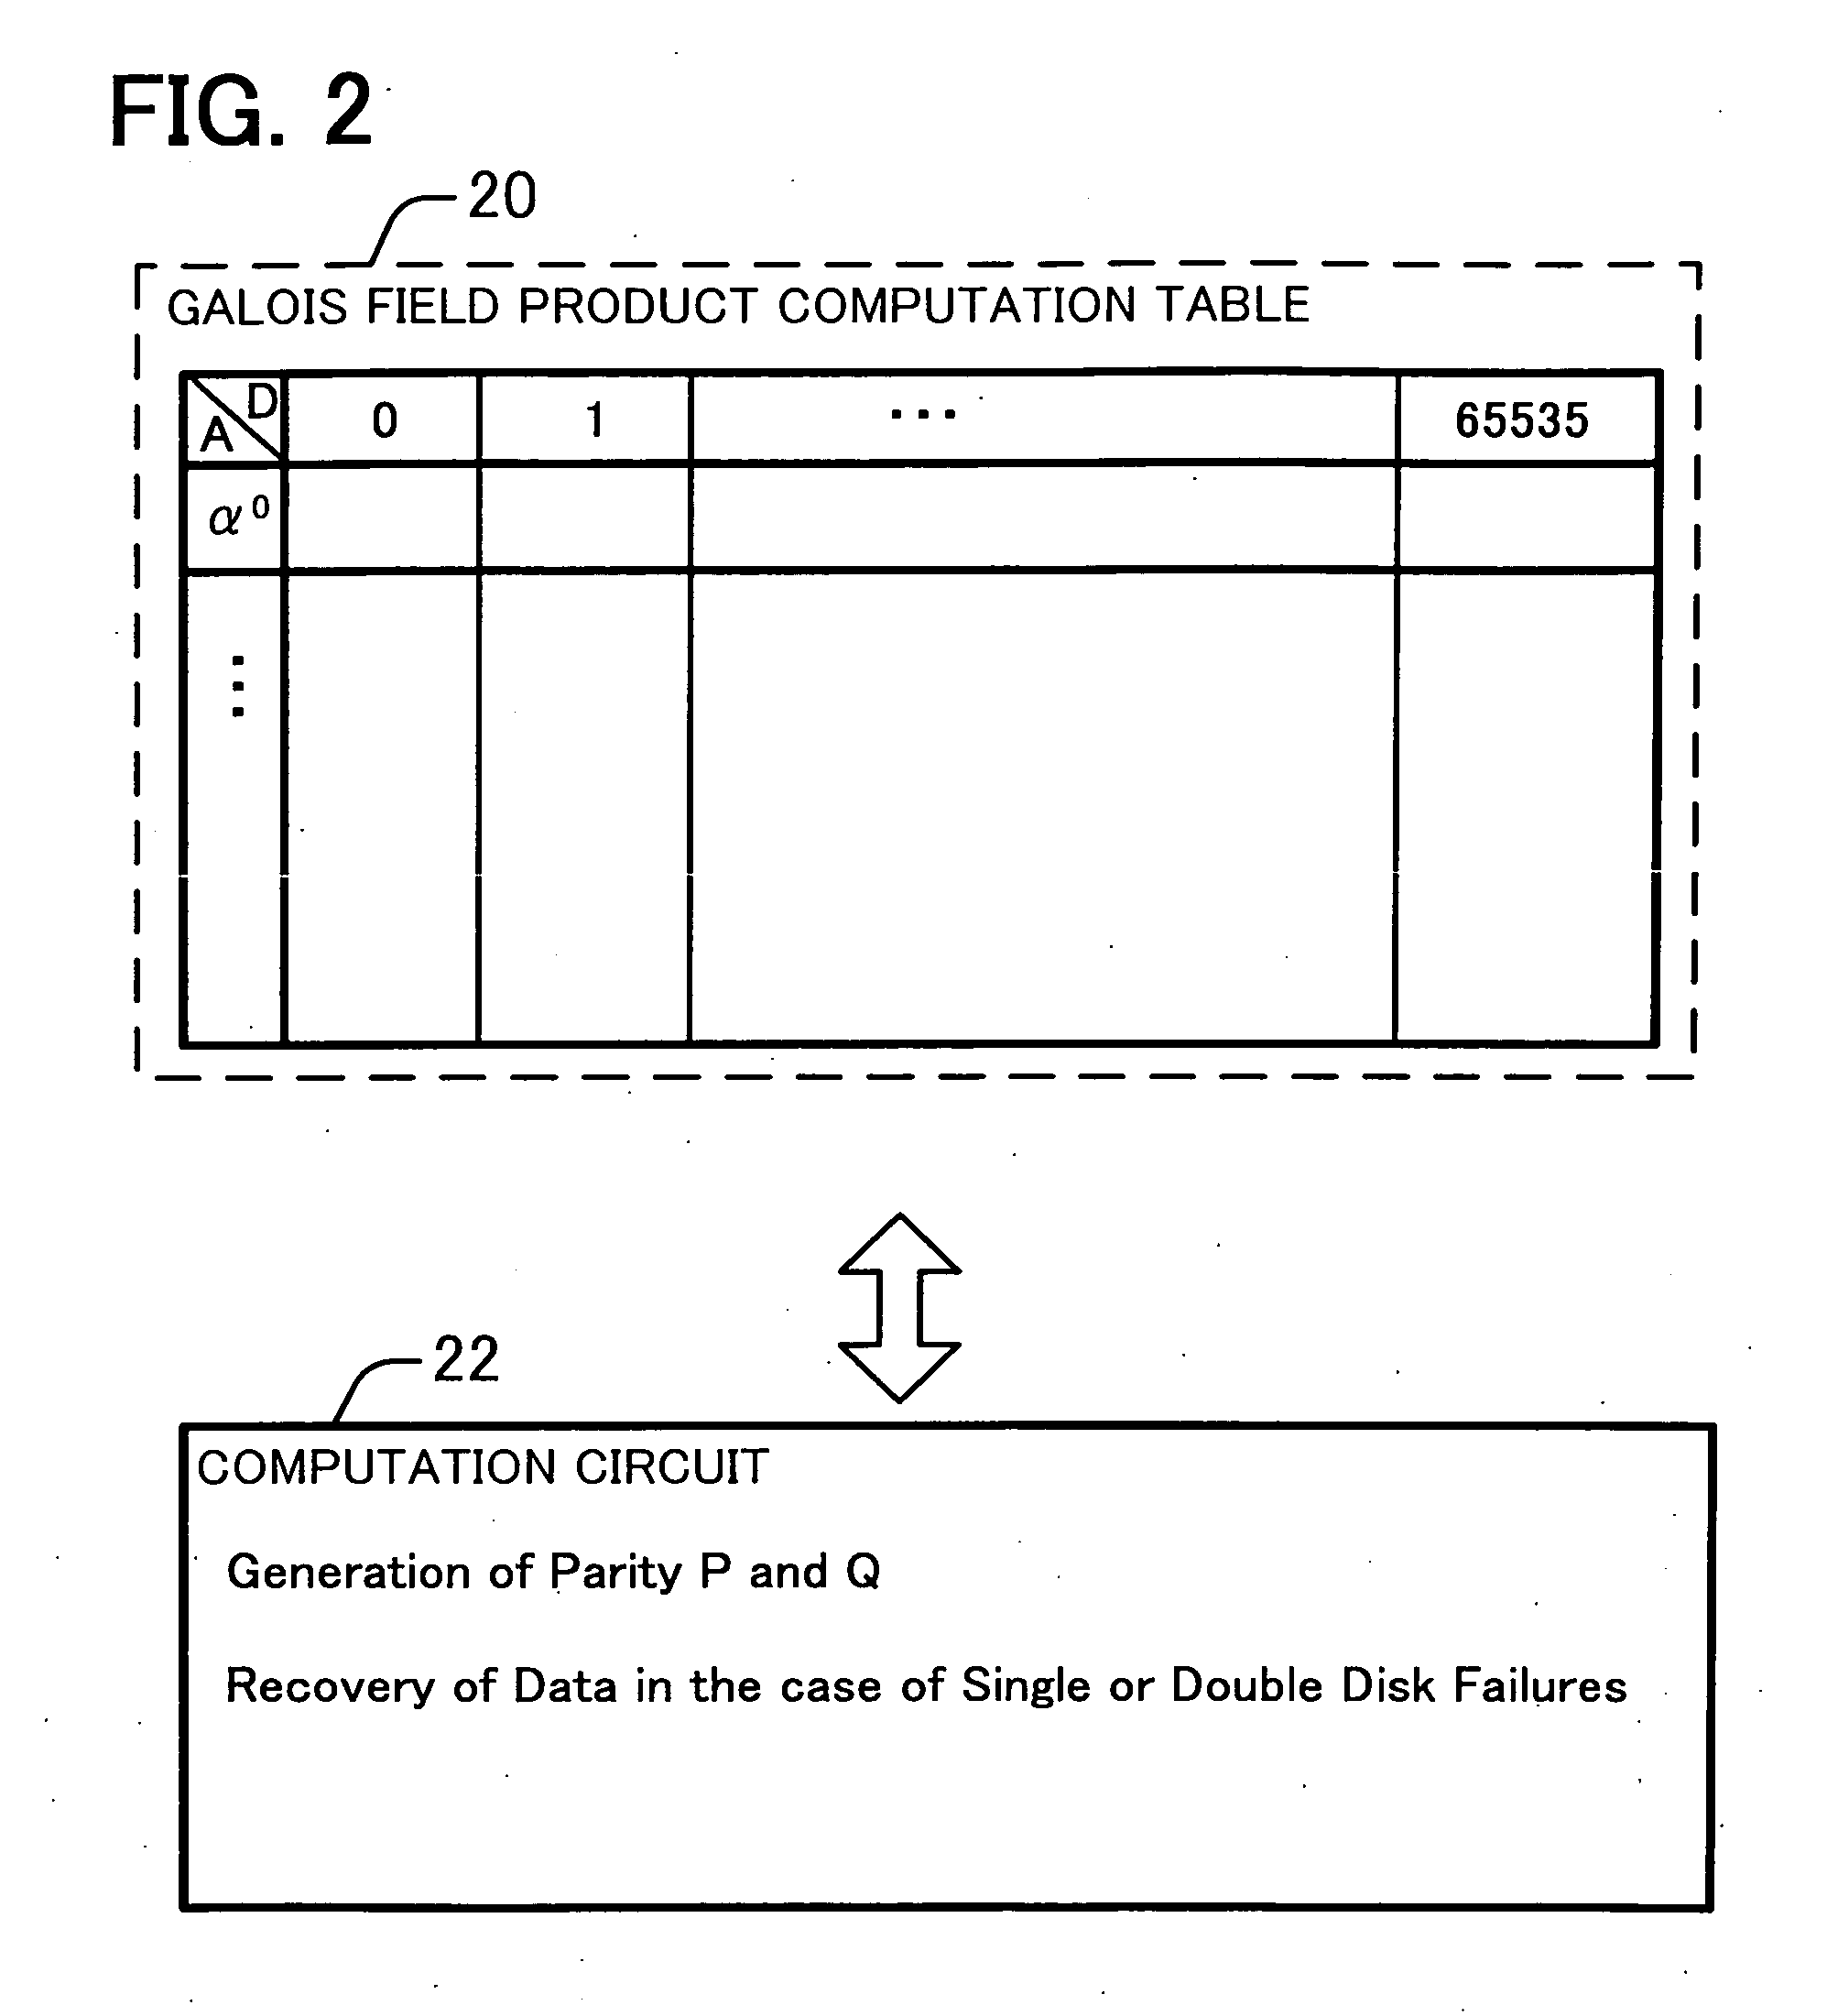 Raid system and data recovery apparatus using galois field